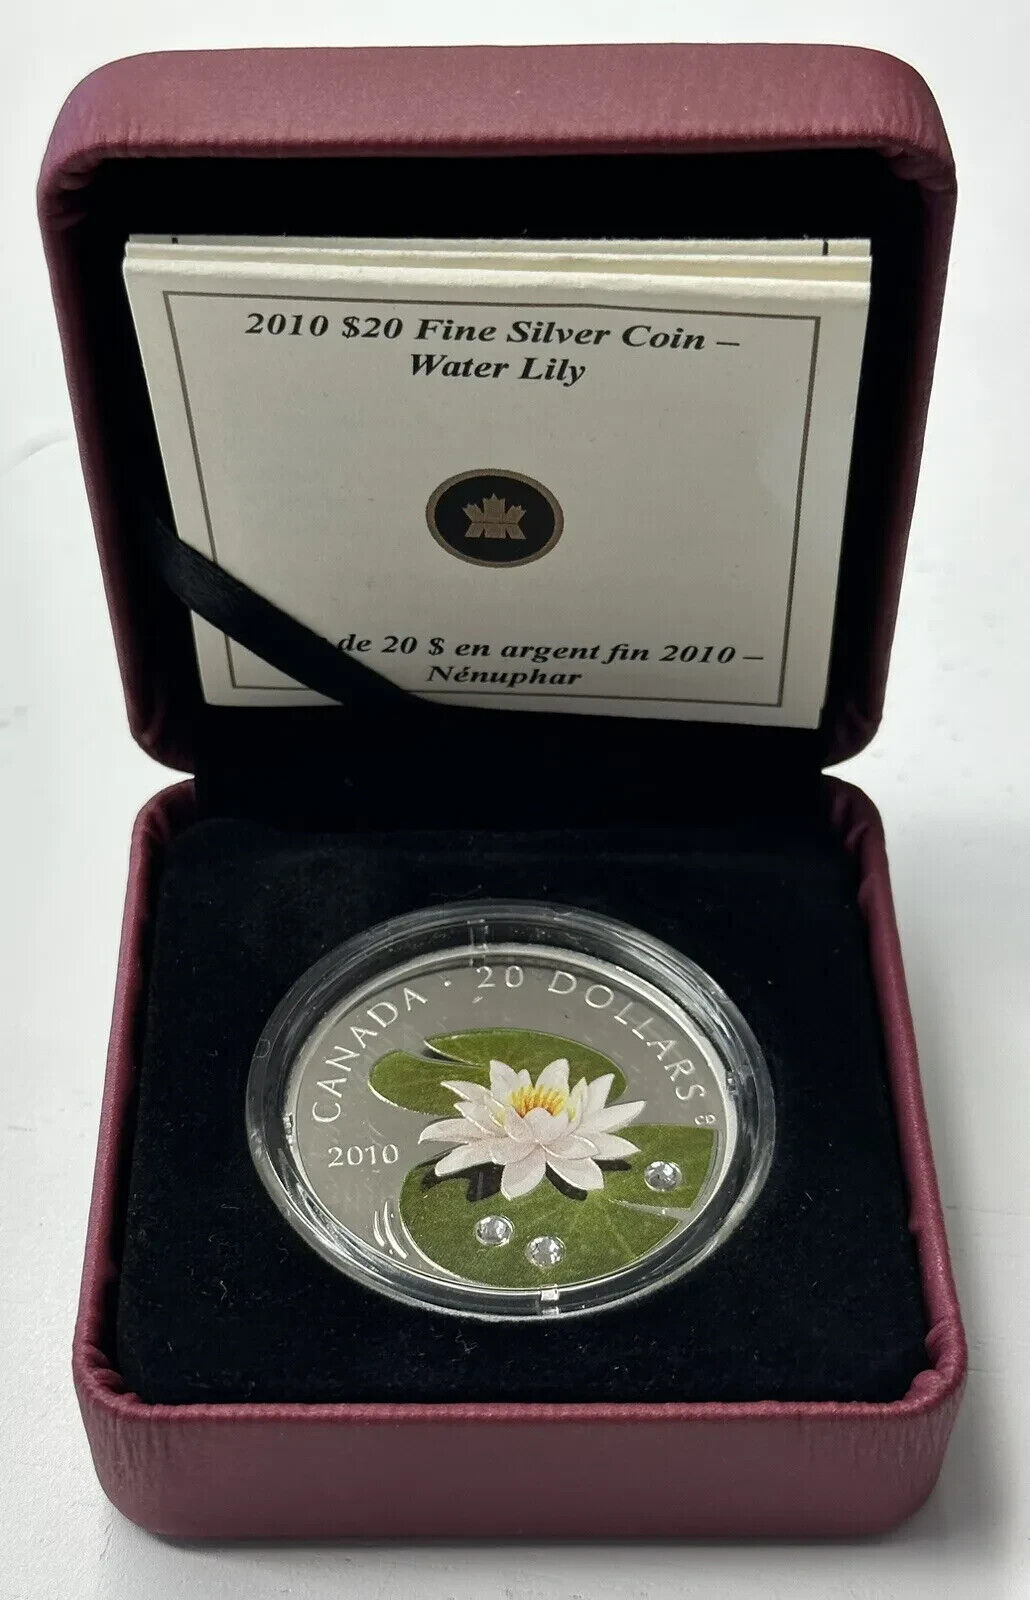 1 Oz Silver Coin 2010 Canada $20 Flowers Water Lily with Swarovski Crystals-classypw.com-4